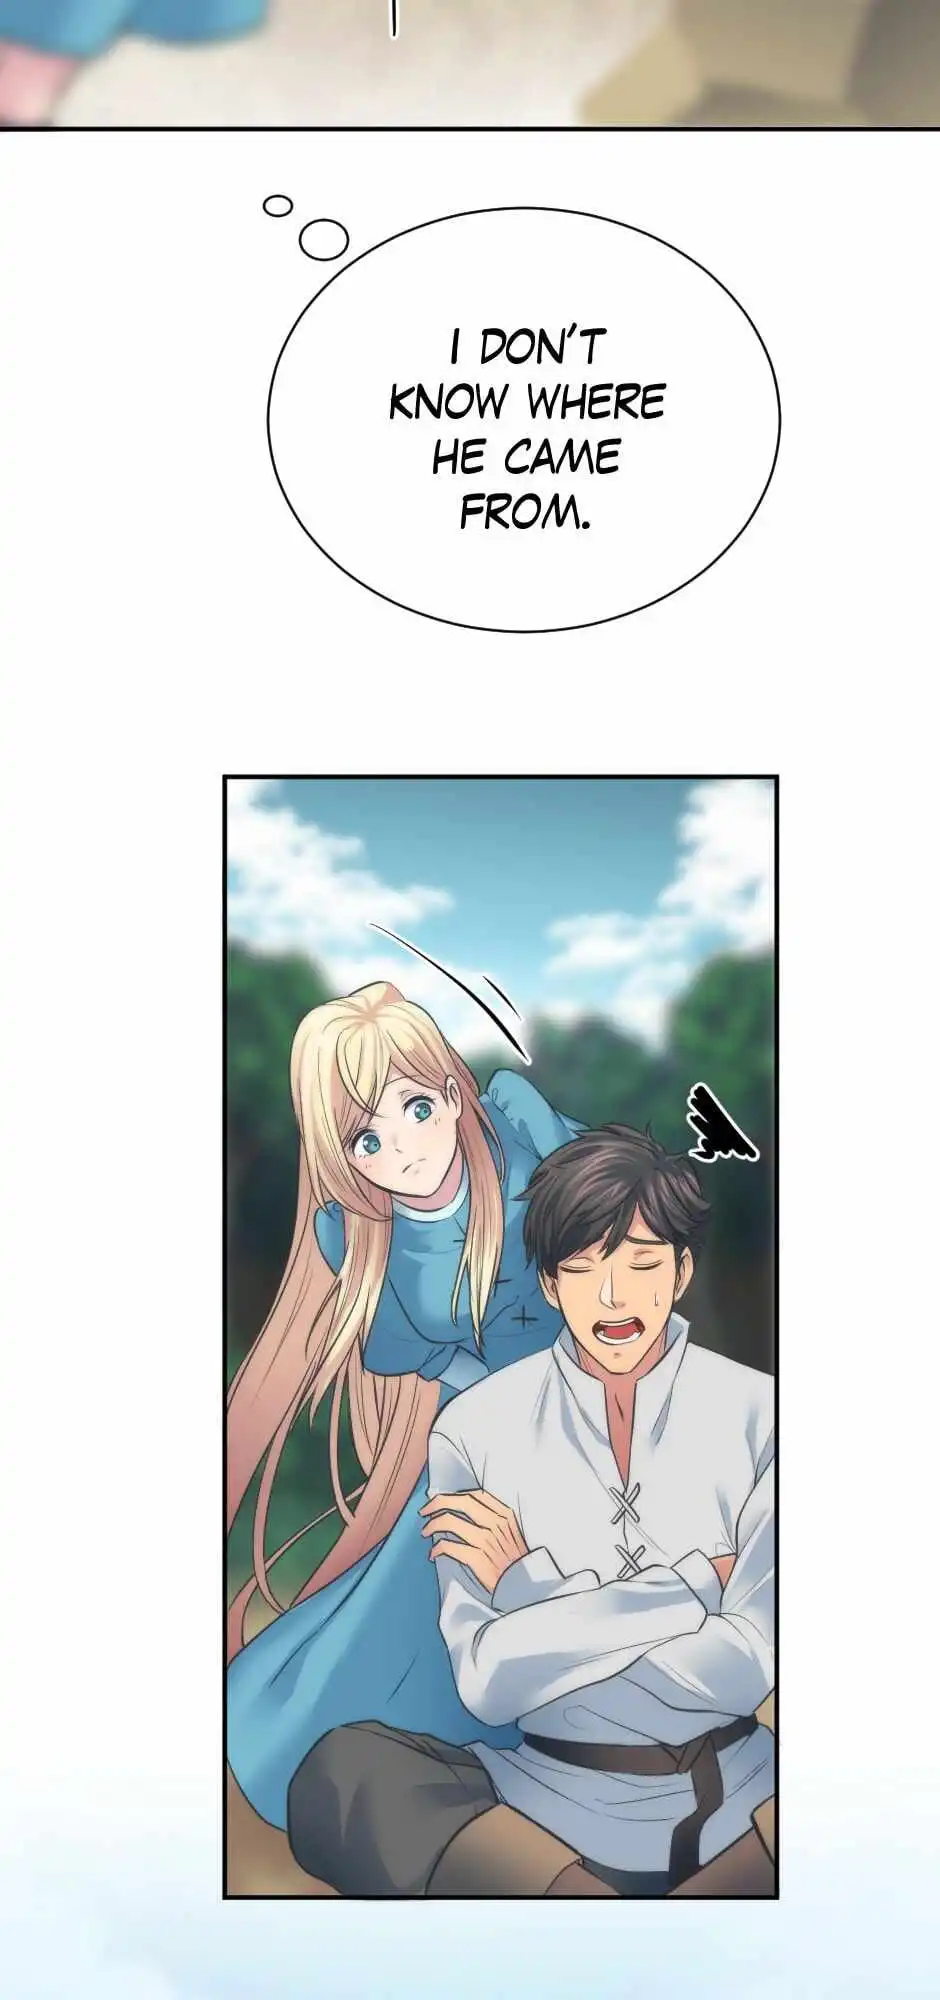 The Dragon Prince's Bride Chapter 26